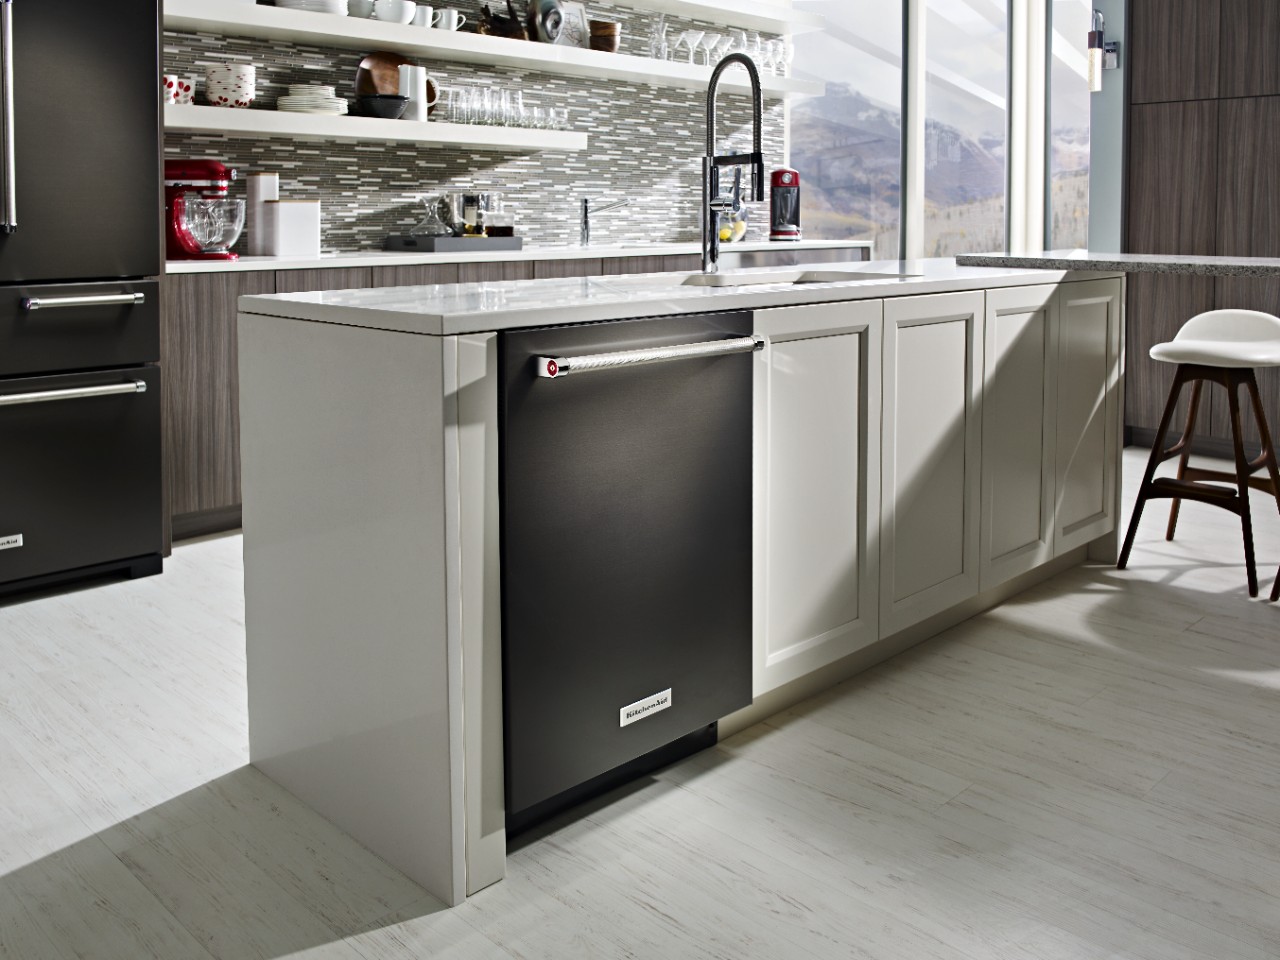 Learn more about KitchenAid Service Contracts & Extended Warranties